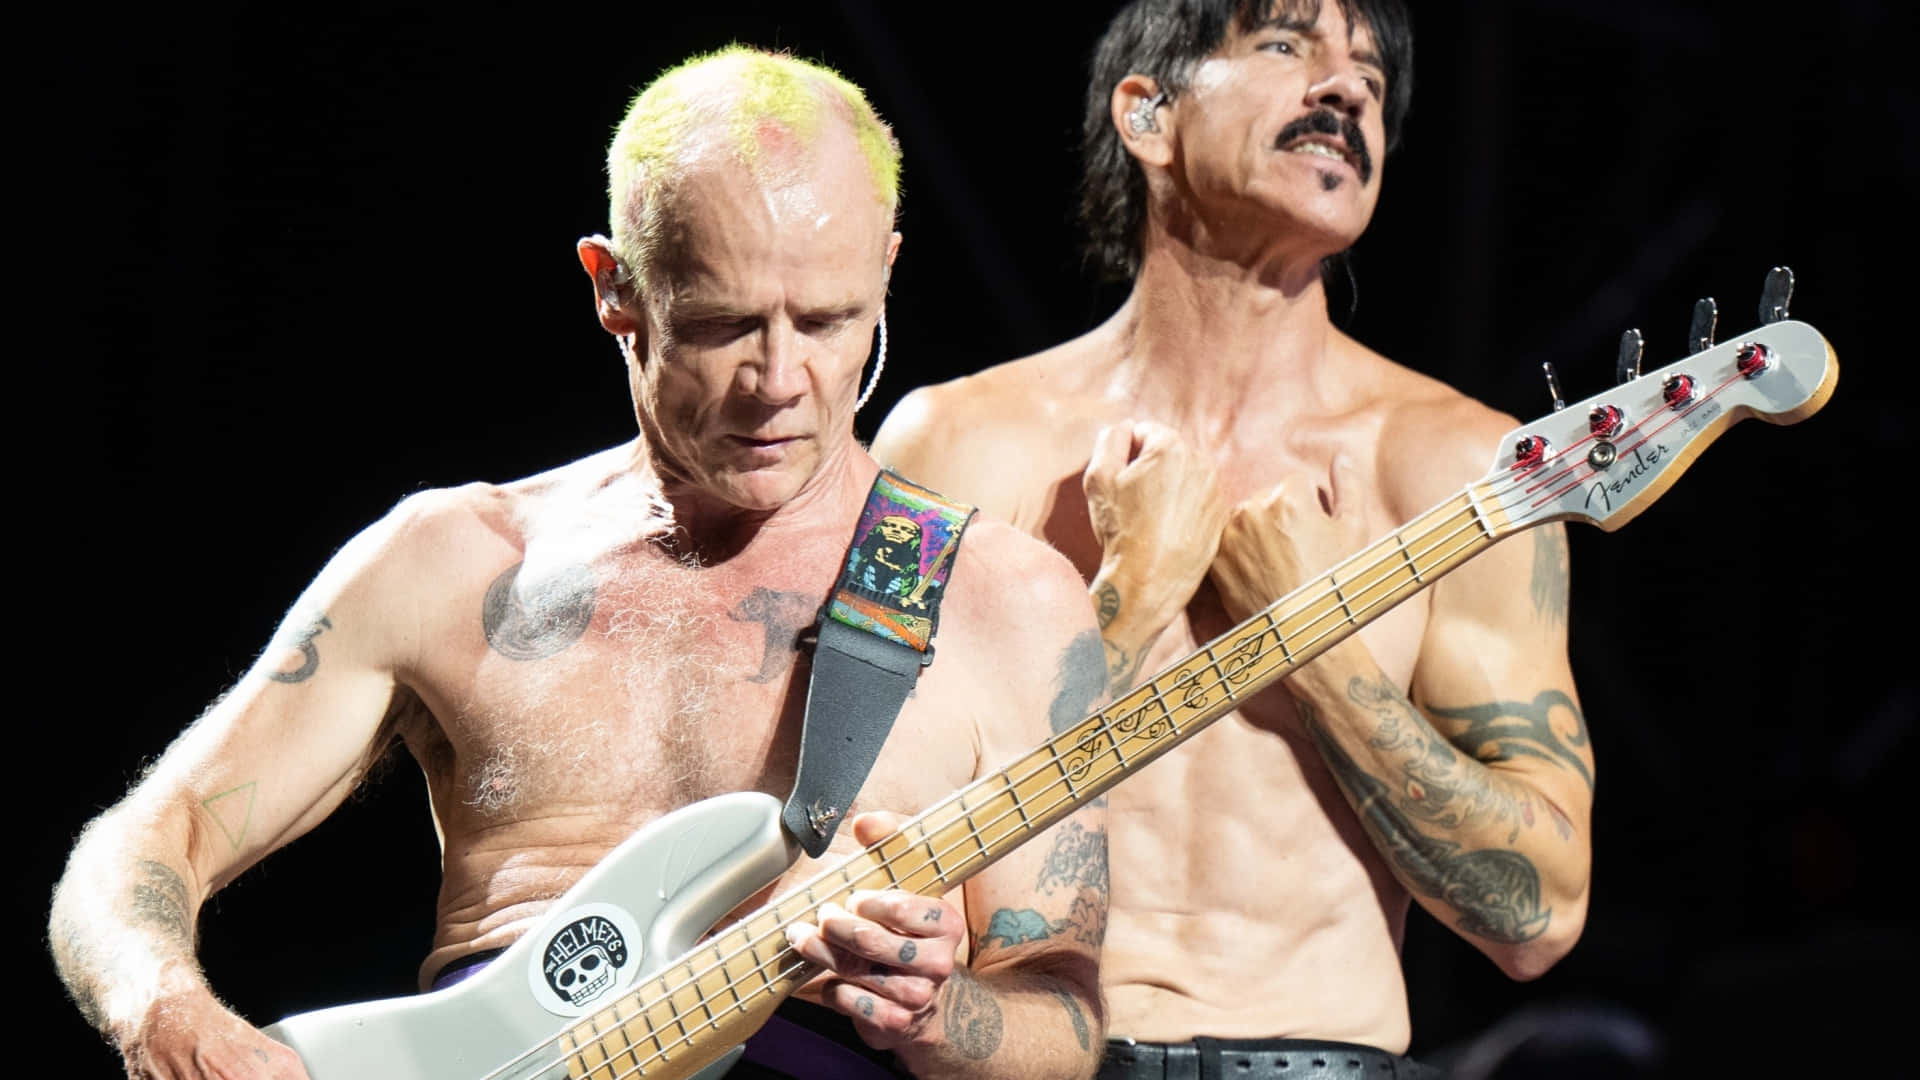 Red Hot Chili Peppers Flea Performing Shirtless Wallpaper